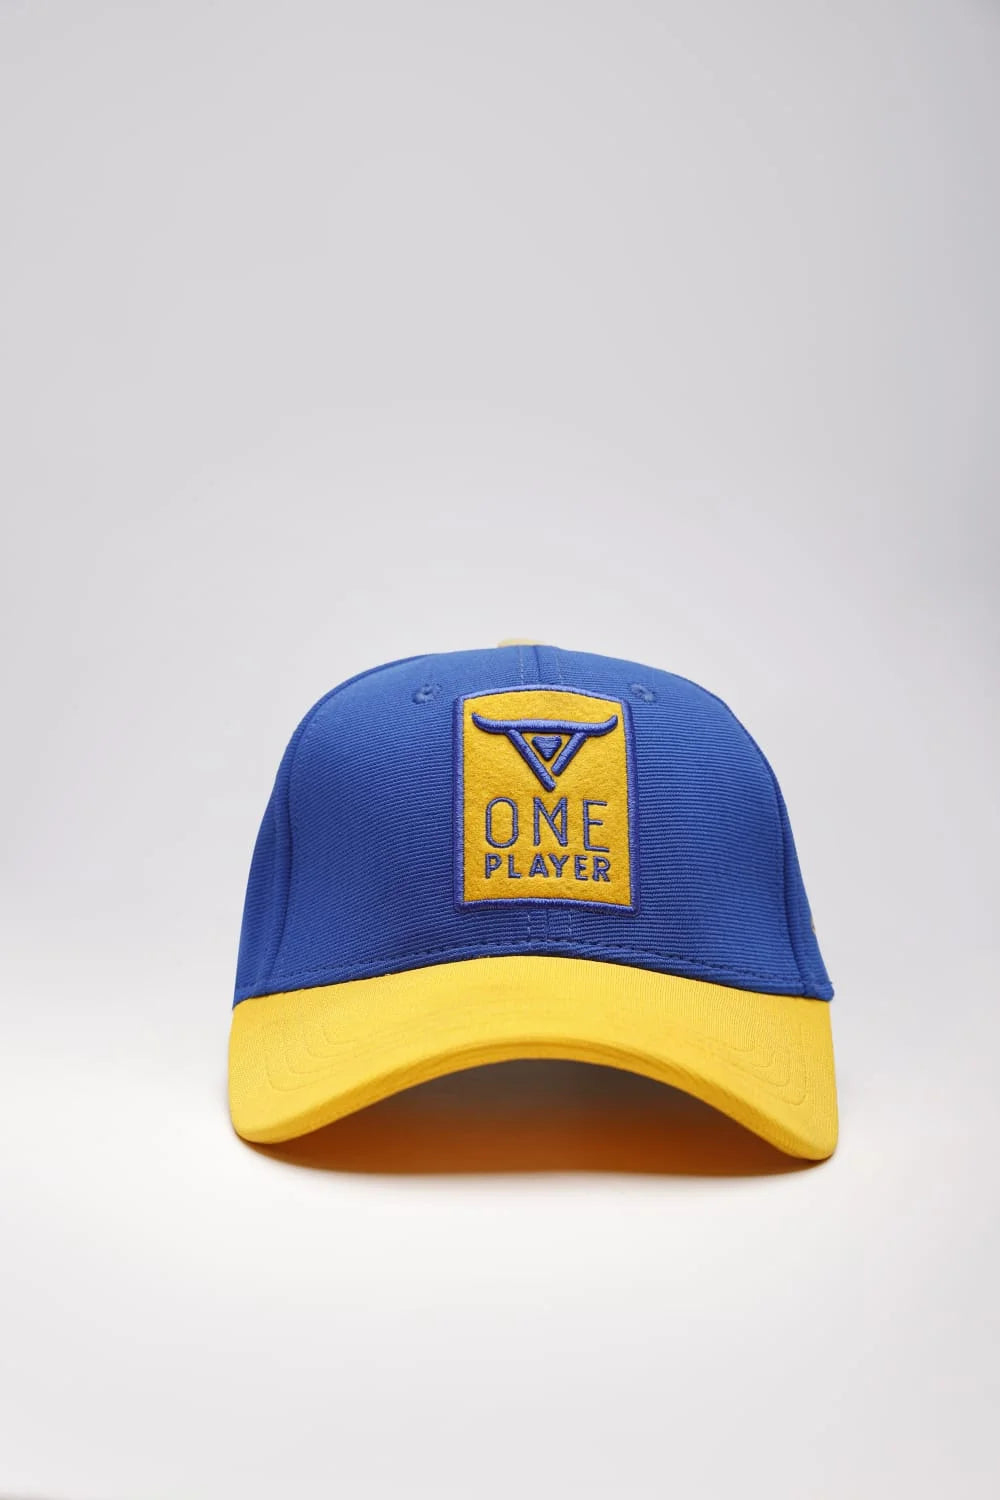 Unisex Yellow & Blue Solid Baseball cap, has a visor by One Player